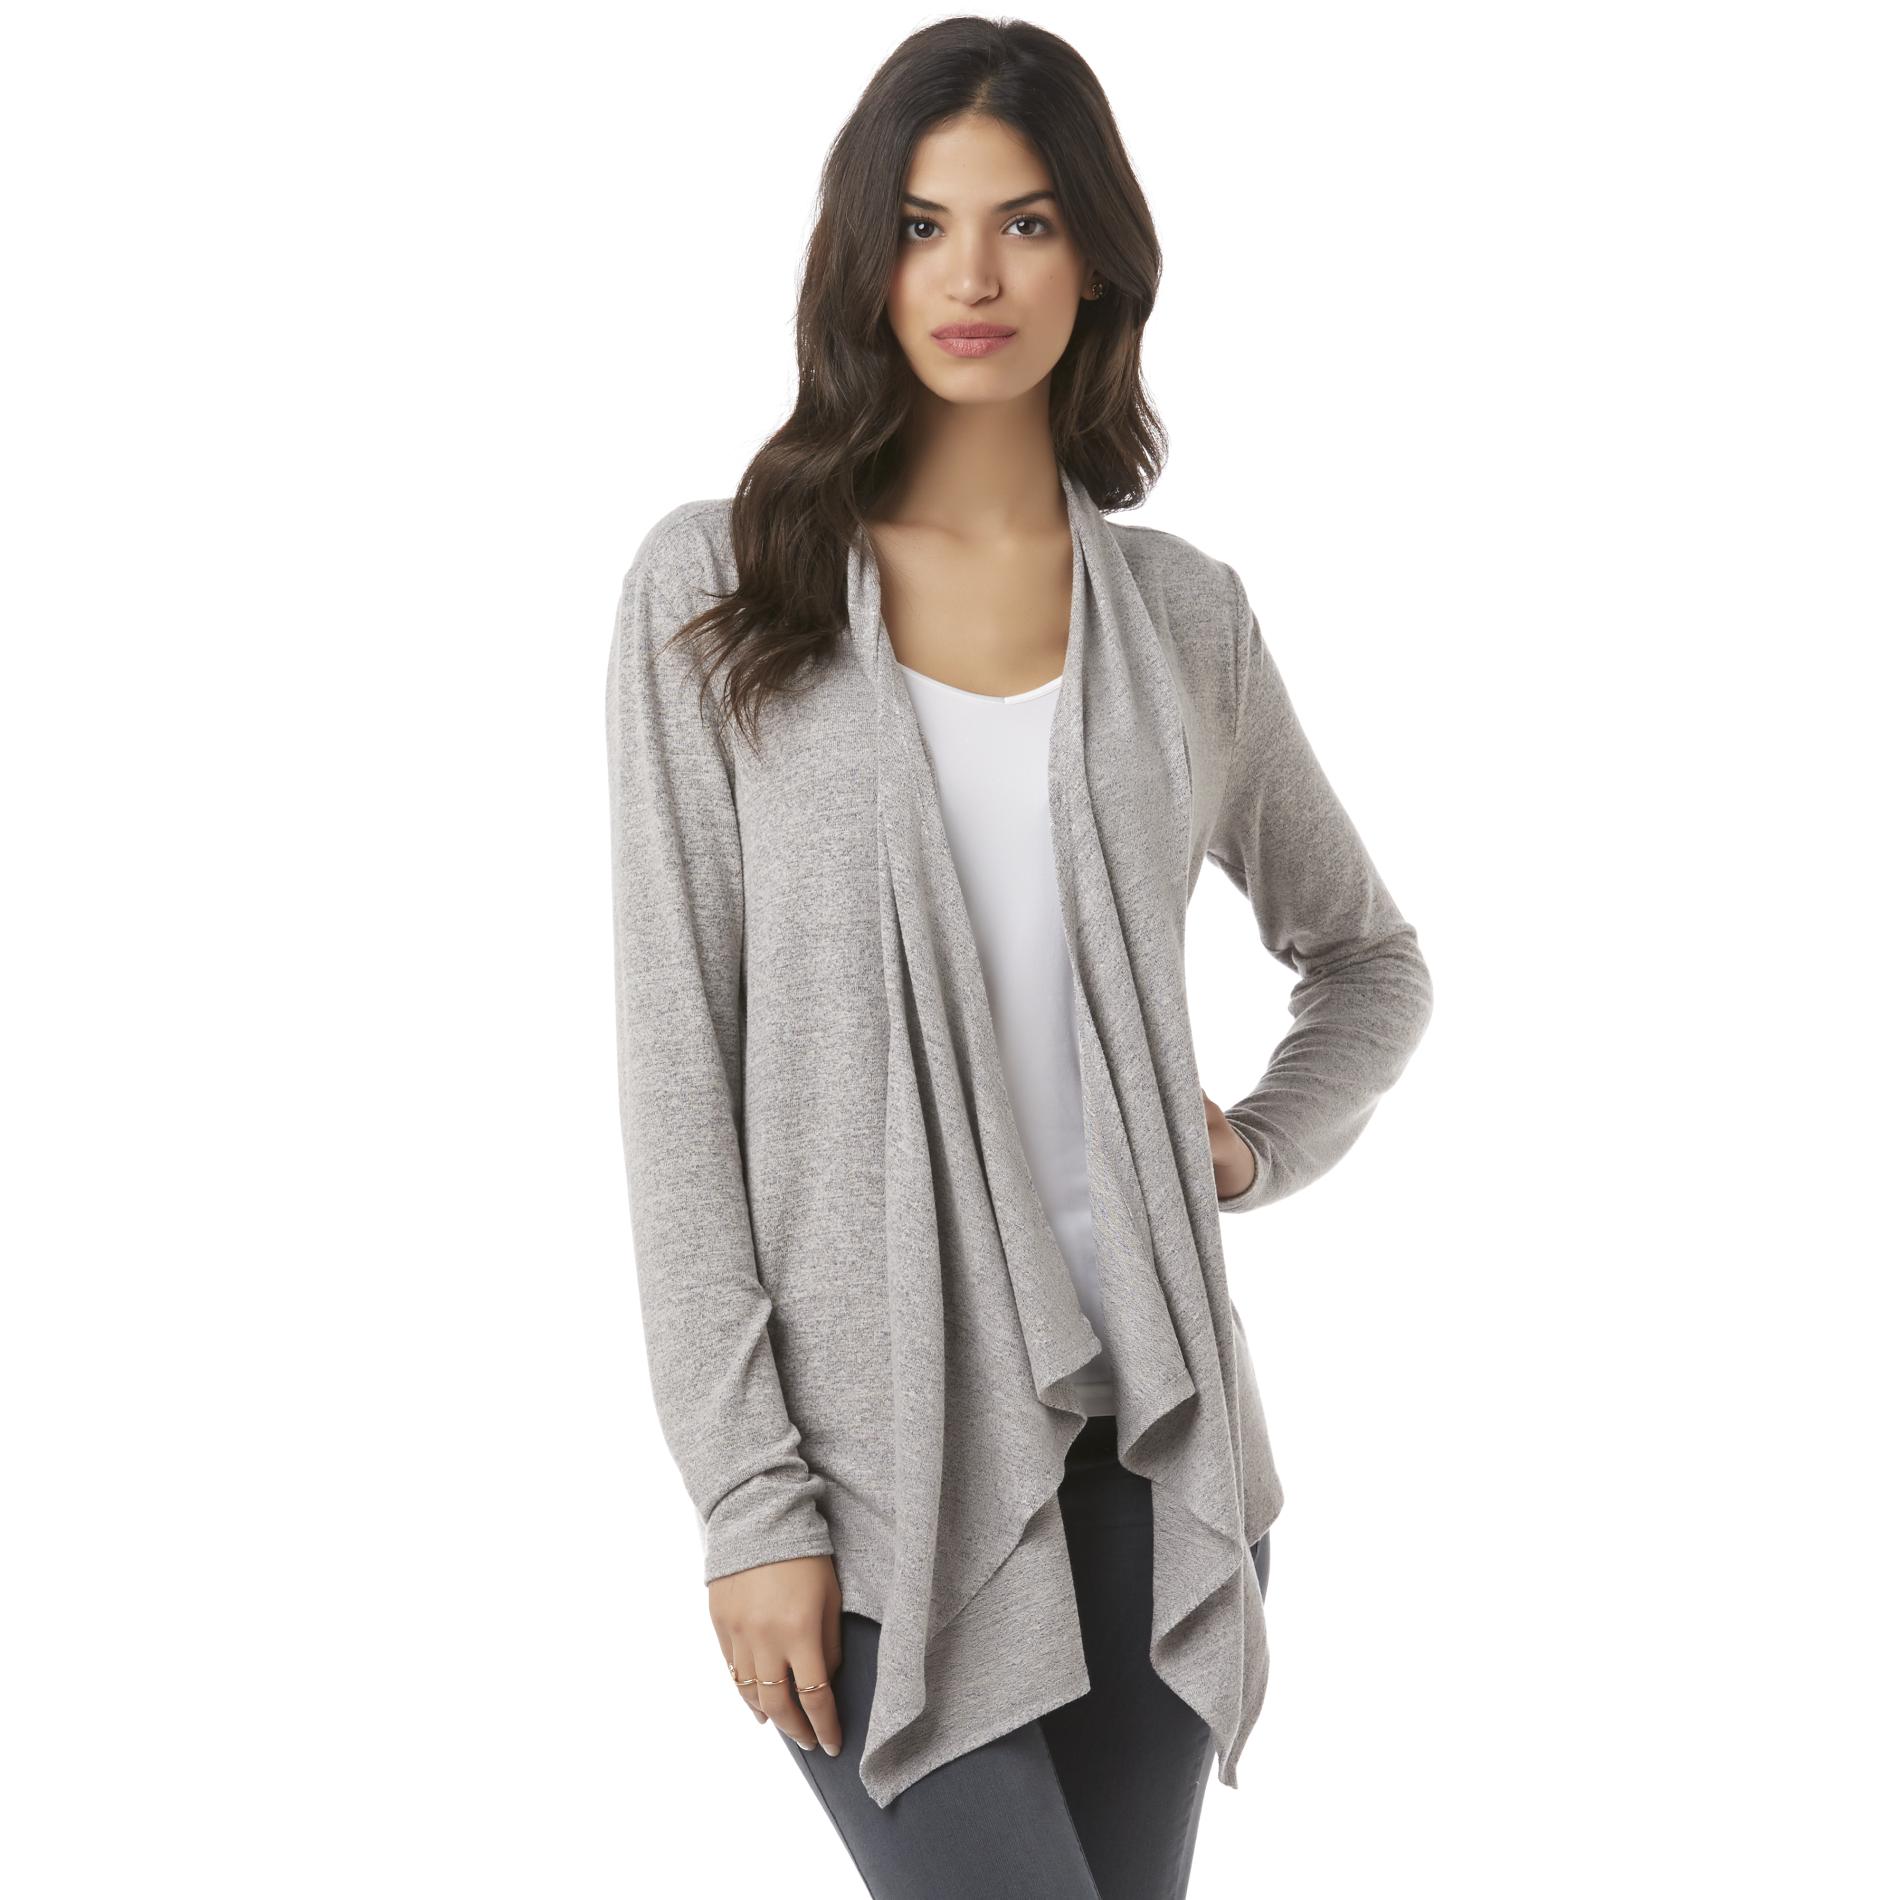 Simply Styled Women's Cardigan - Marled